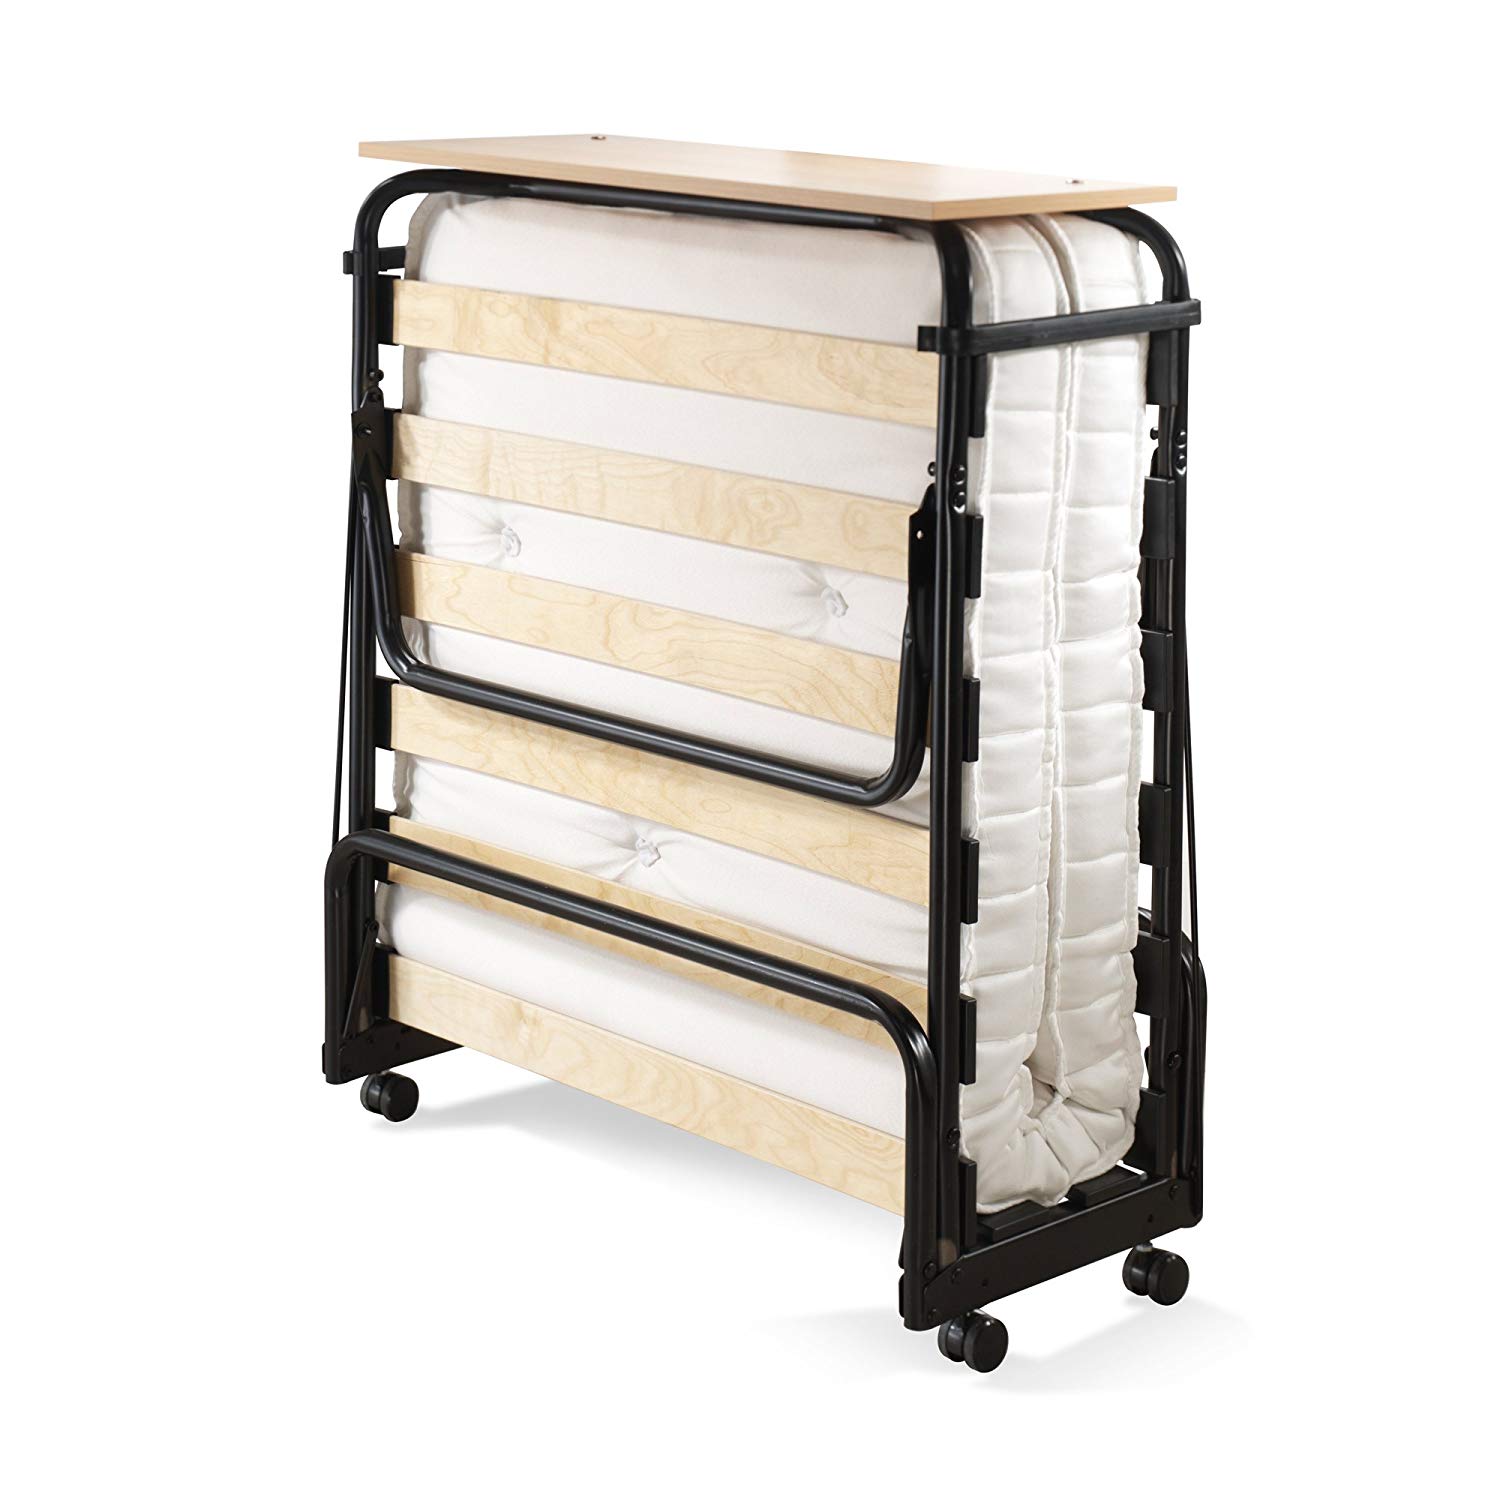 Folding beds amazon.com: Jay-be Contour folding bed with pocket spring mattress and strong MBDPNKH